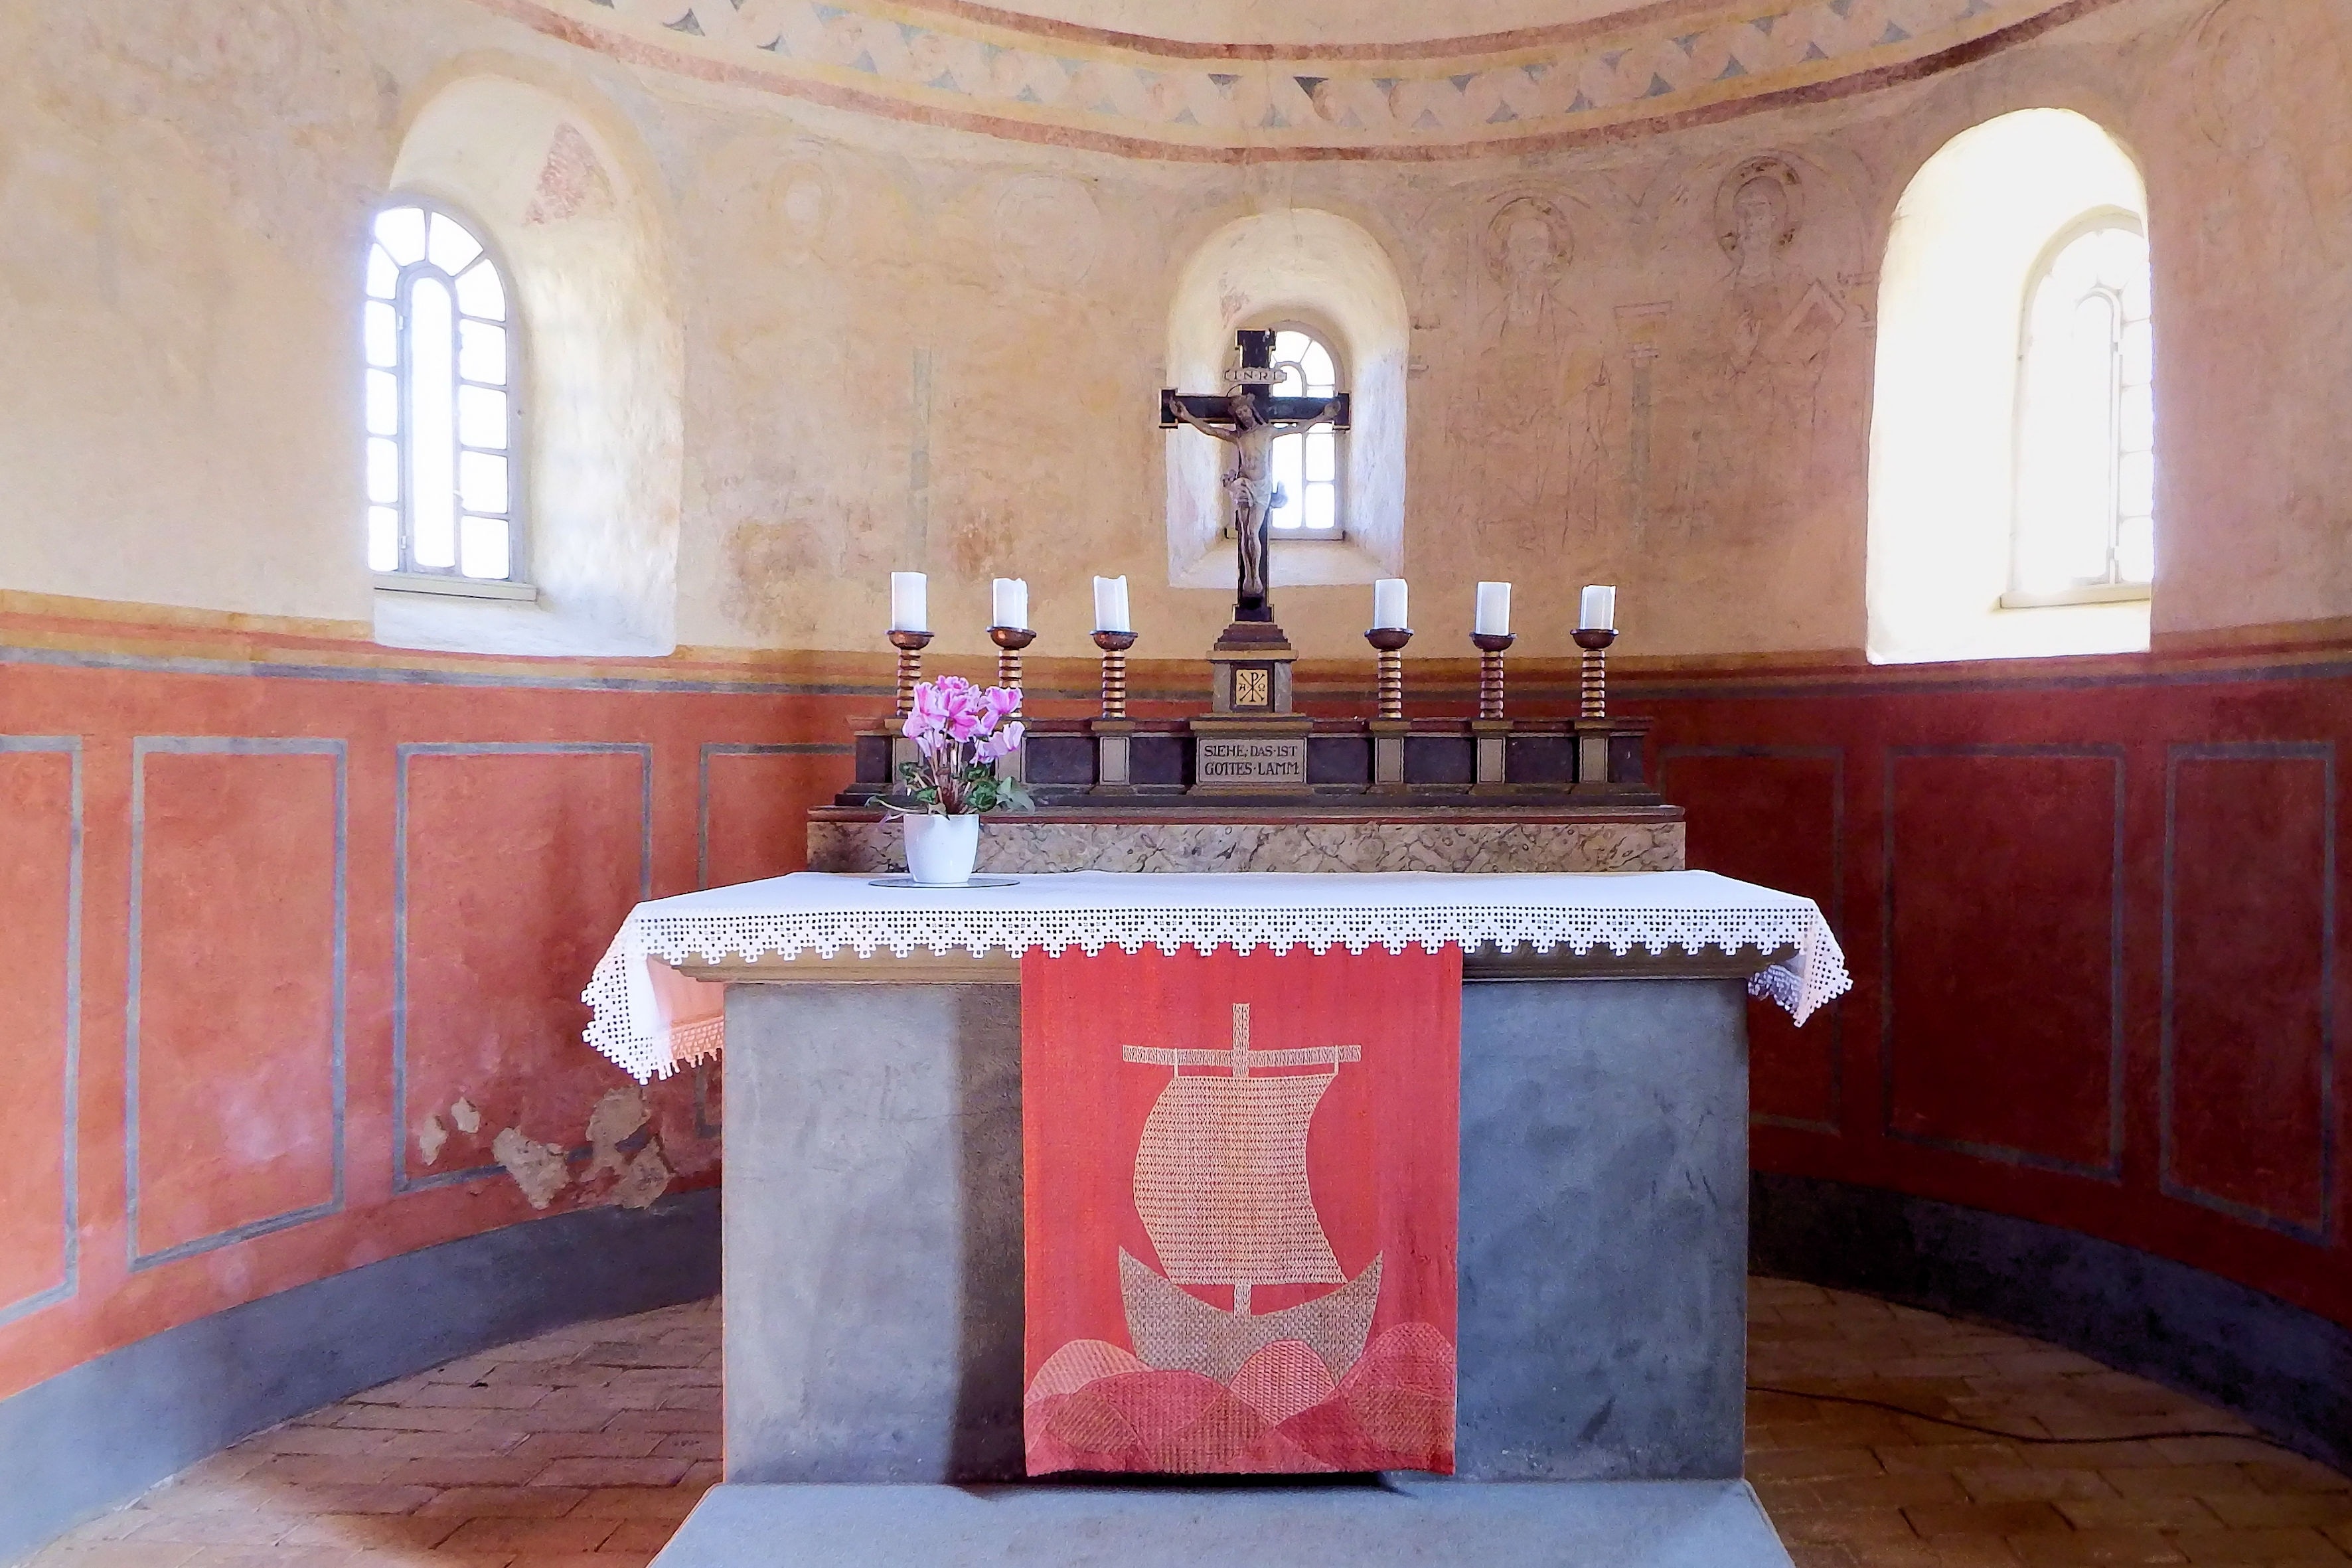 Altar, Church, Cross, Candles, Religion, indoors, architecture